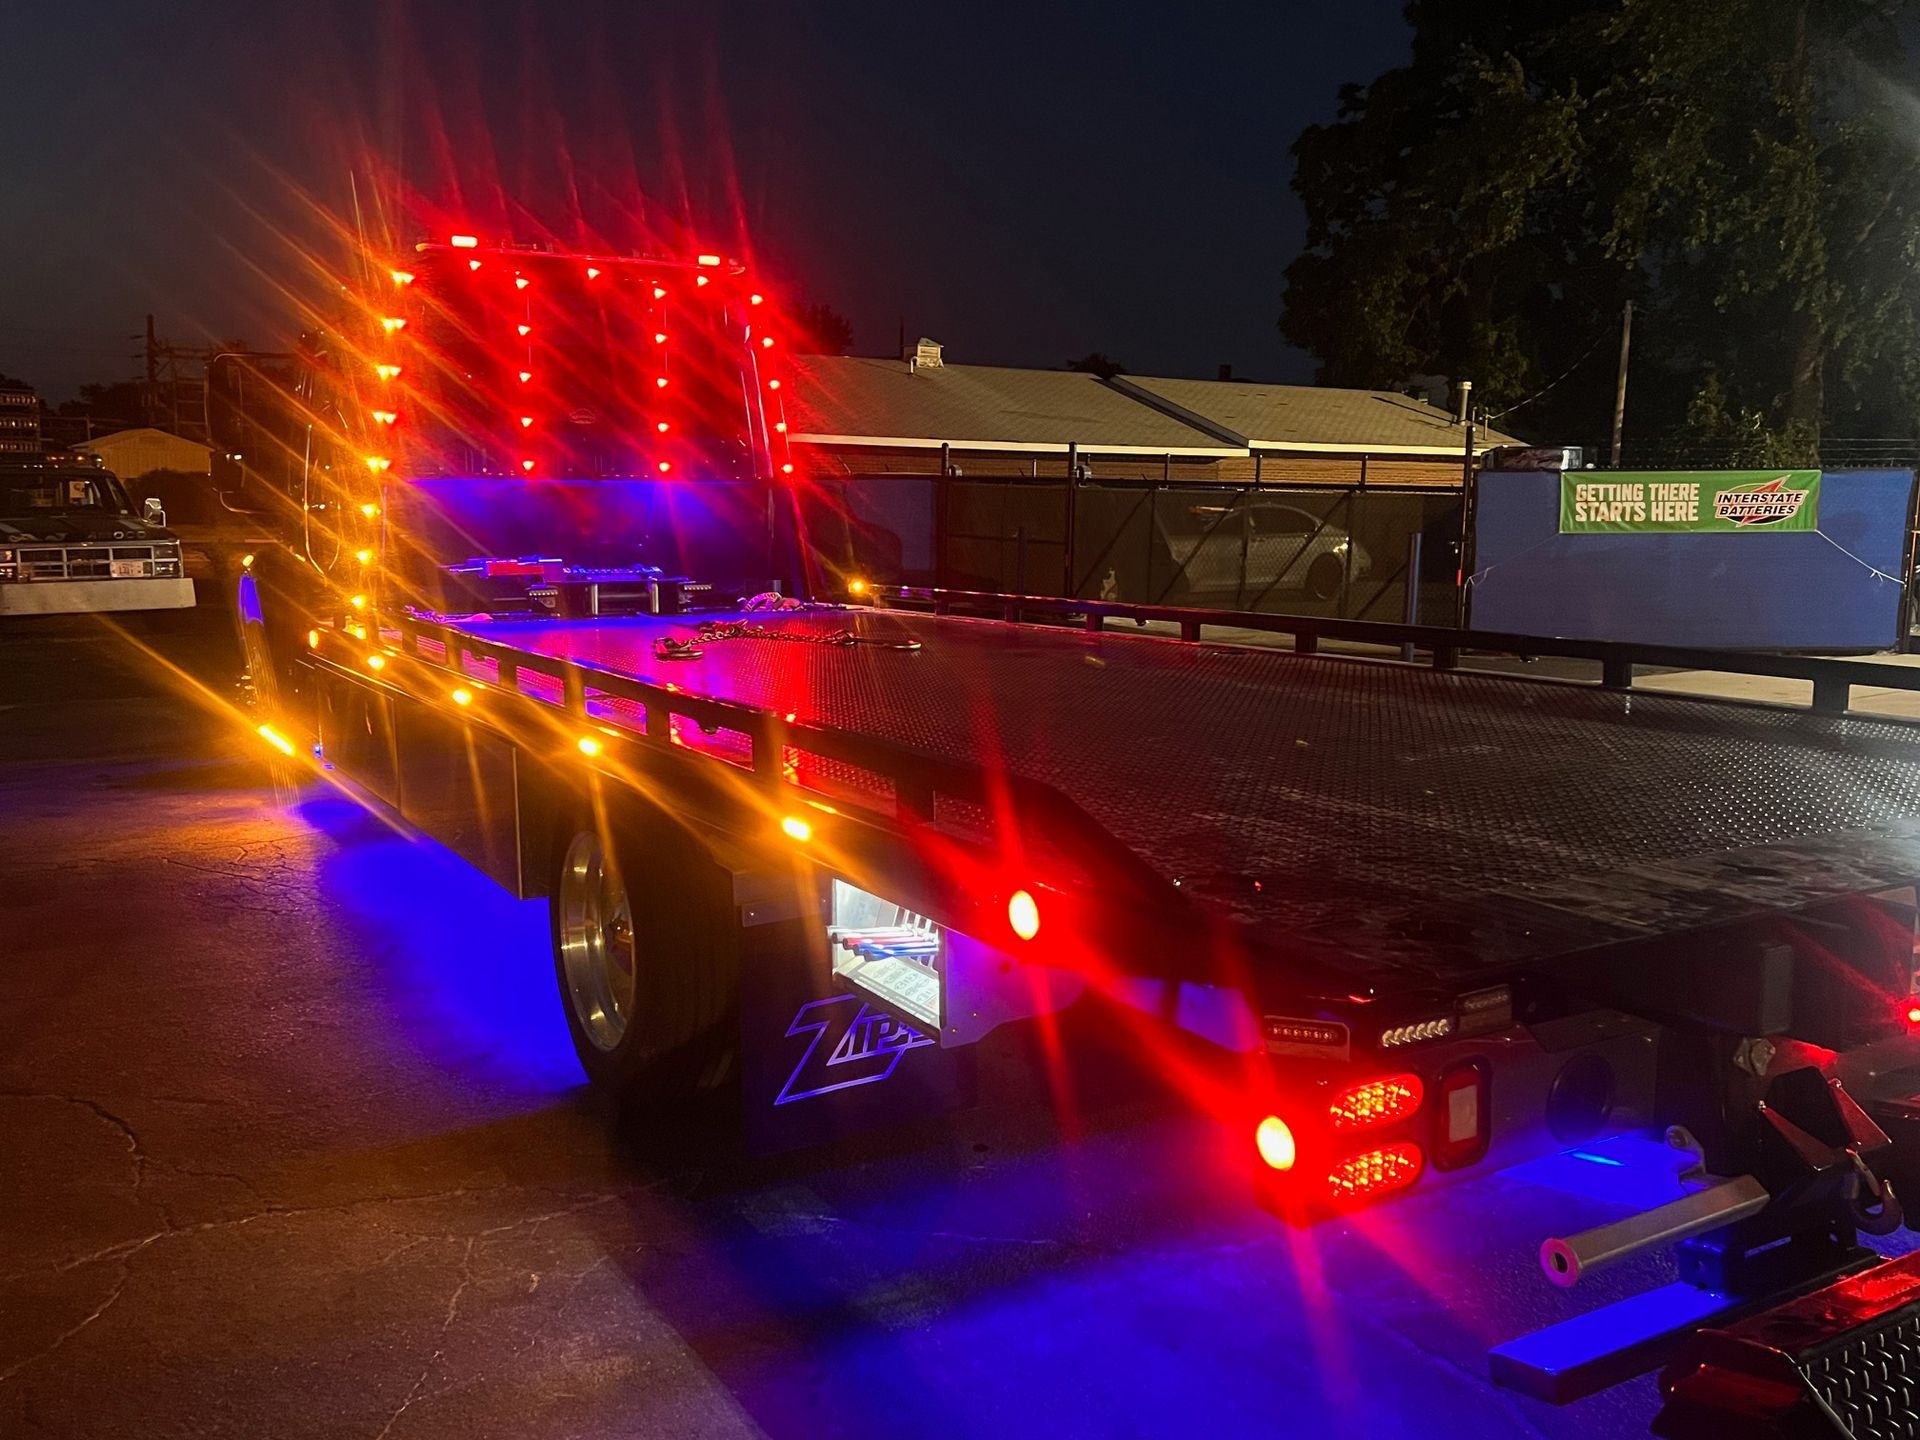 A blue tow truck in the dark being illuminated by its orange and red lights